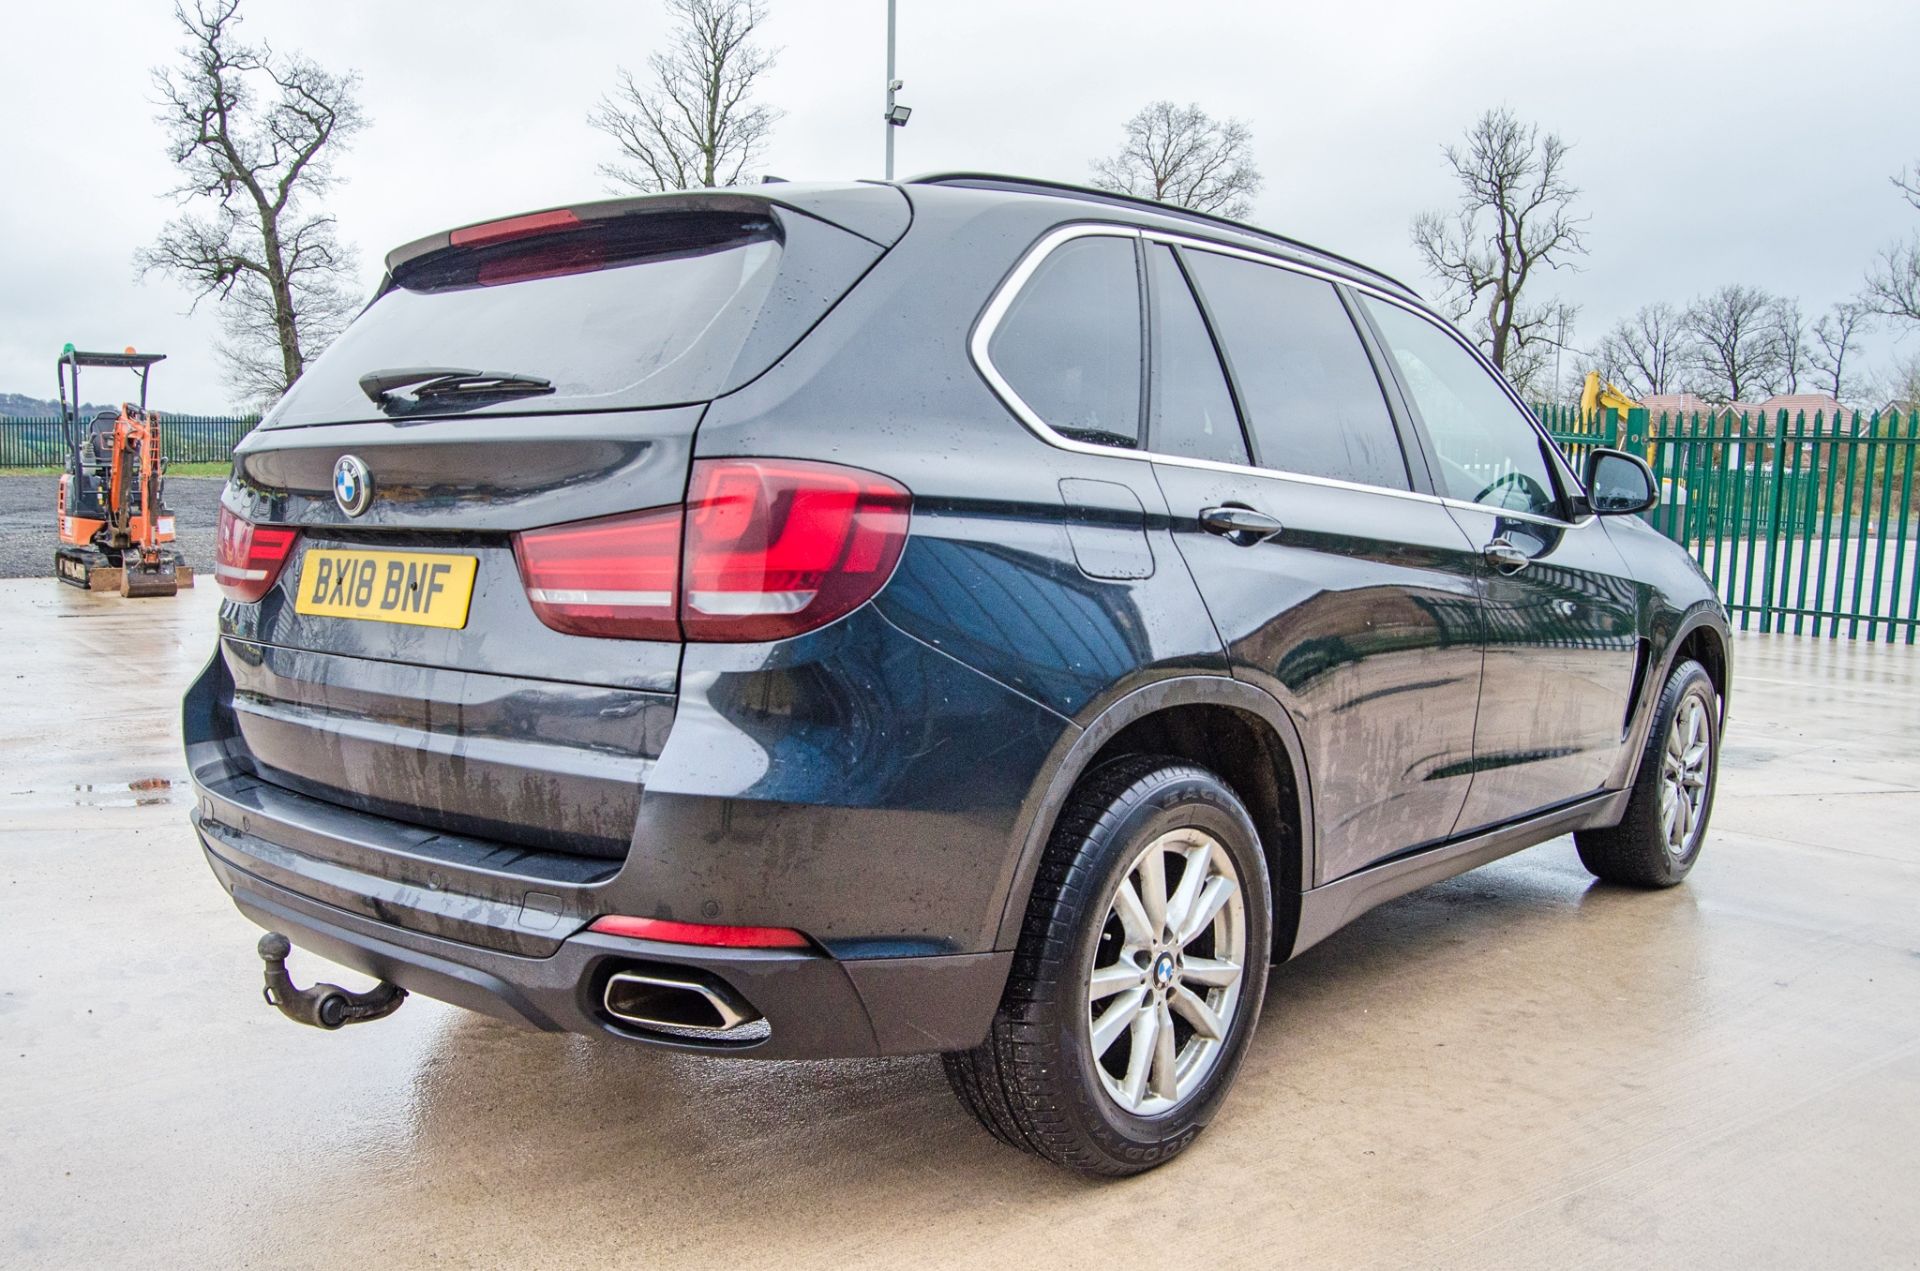 BMW X5 XDRIVE 30D 2999cc diesel automatic estate car EX POLICE Registration Number: BX18 BNF Date of - Image 3 of 32